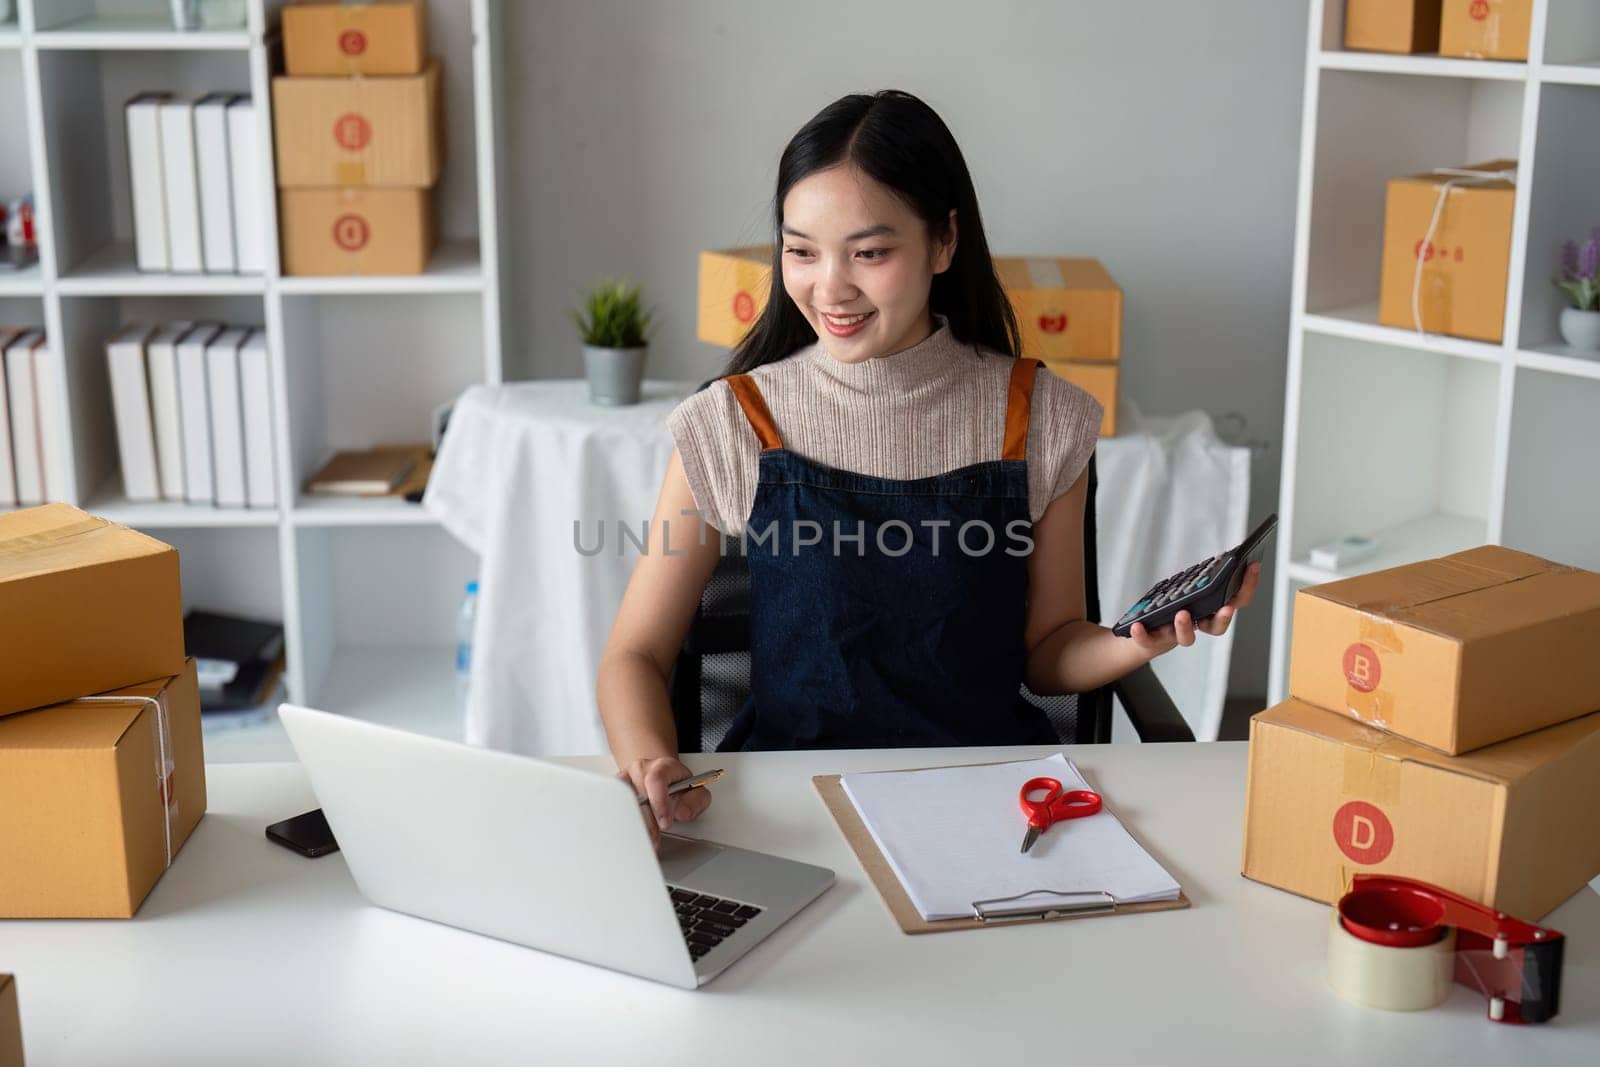 Startup small business entrepreneur of freelance Asian woman using laptop and box to receive and review order online to prepare to pack sell to customer, online business ideas by nateemee